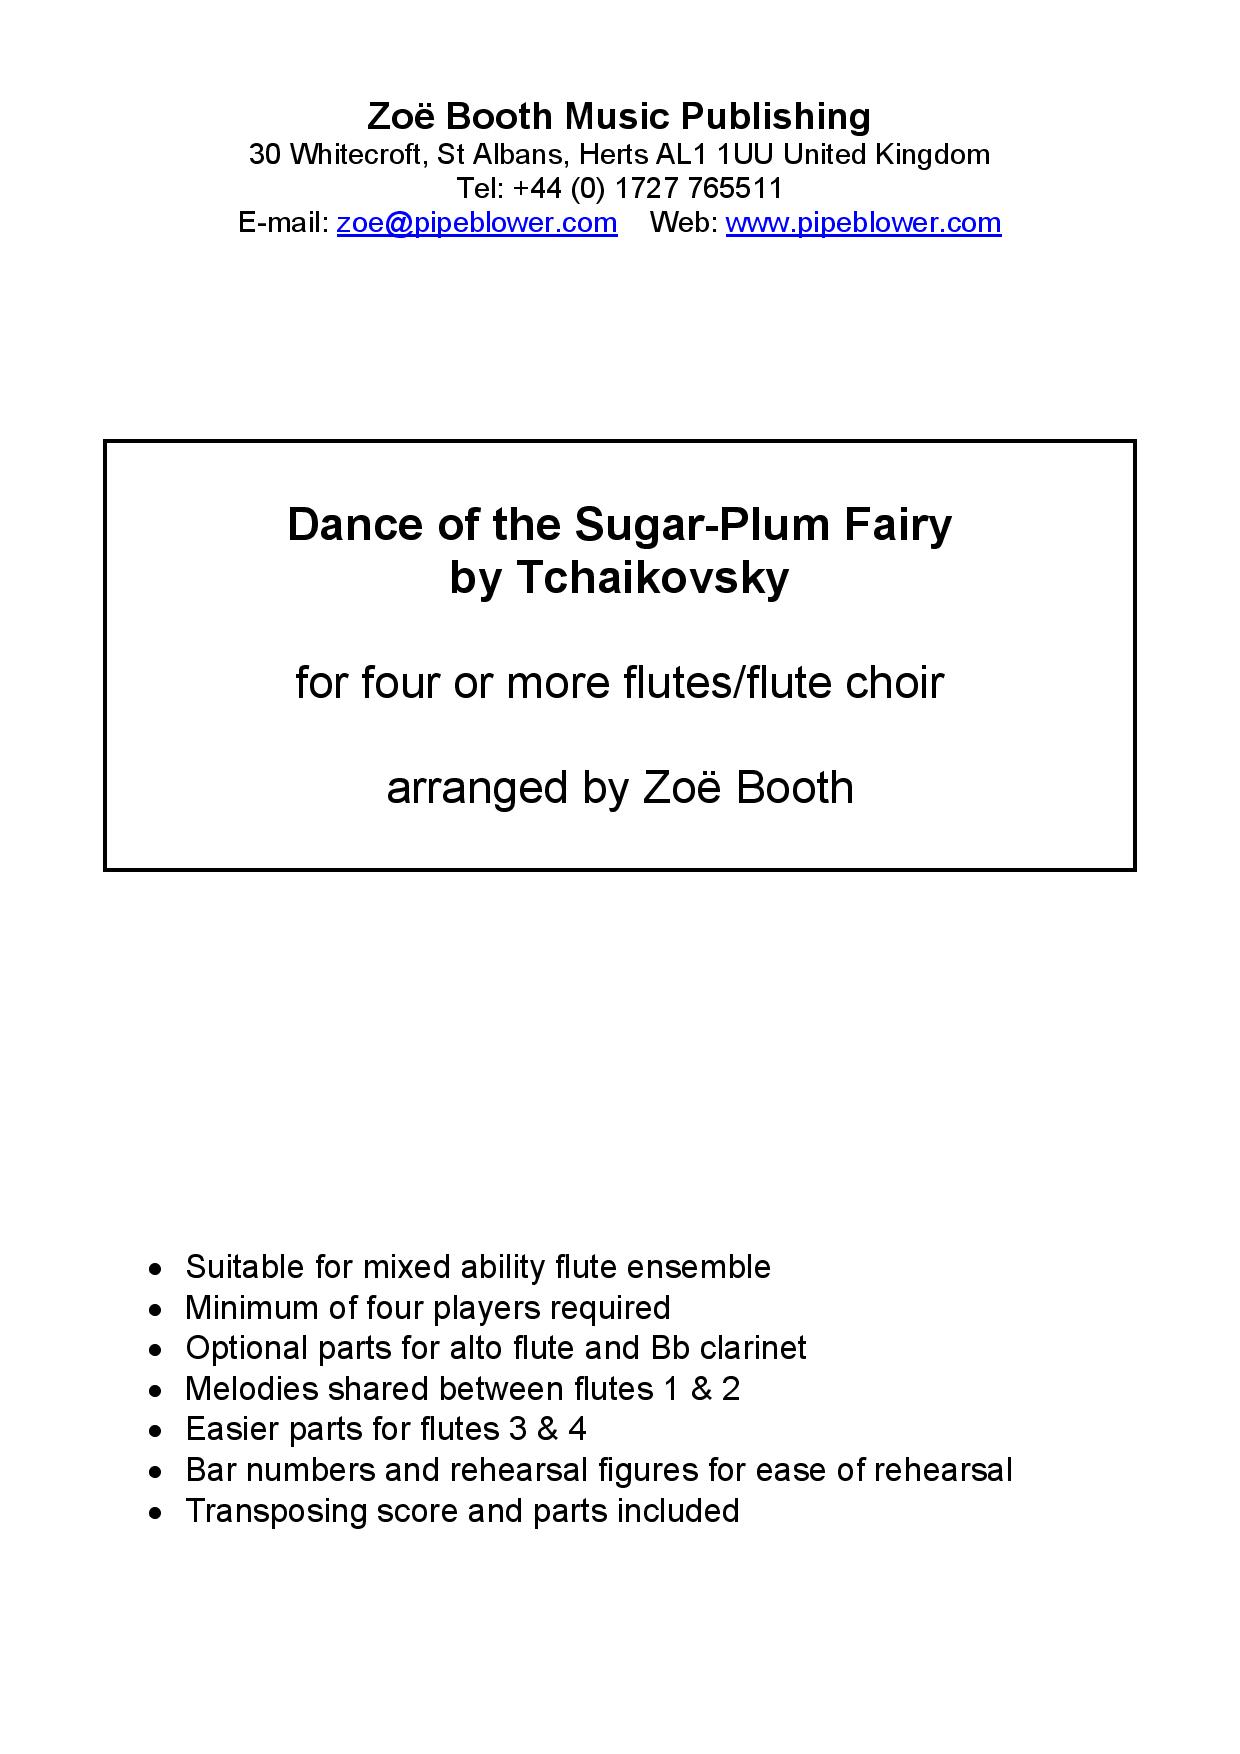 Dance of the Sugar-Plum Fairy by Tchaikovsky, arranged by Zoë Booth for four or more flutes...